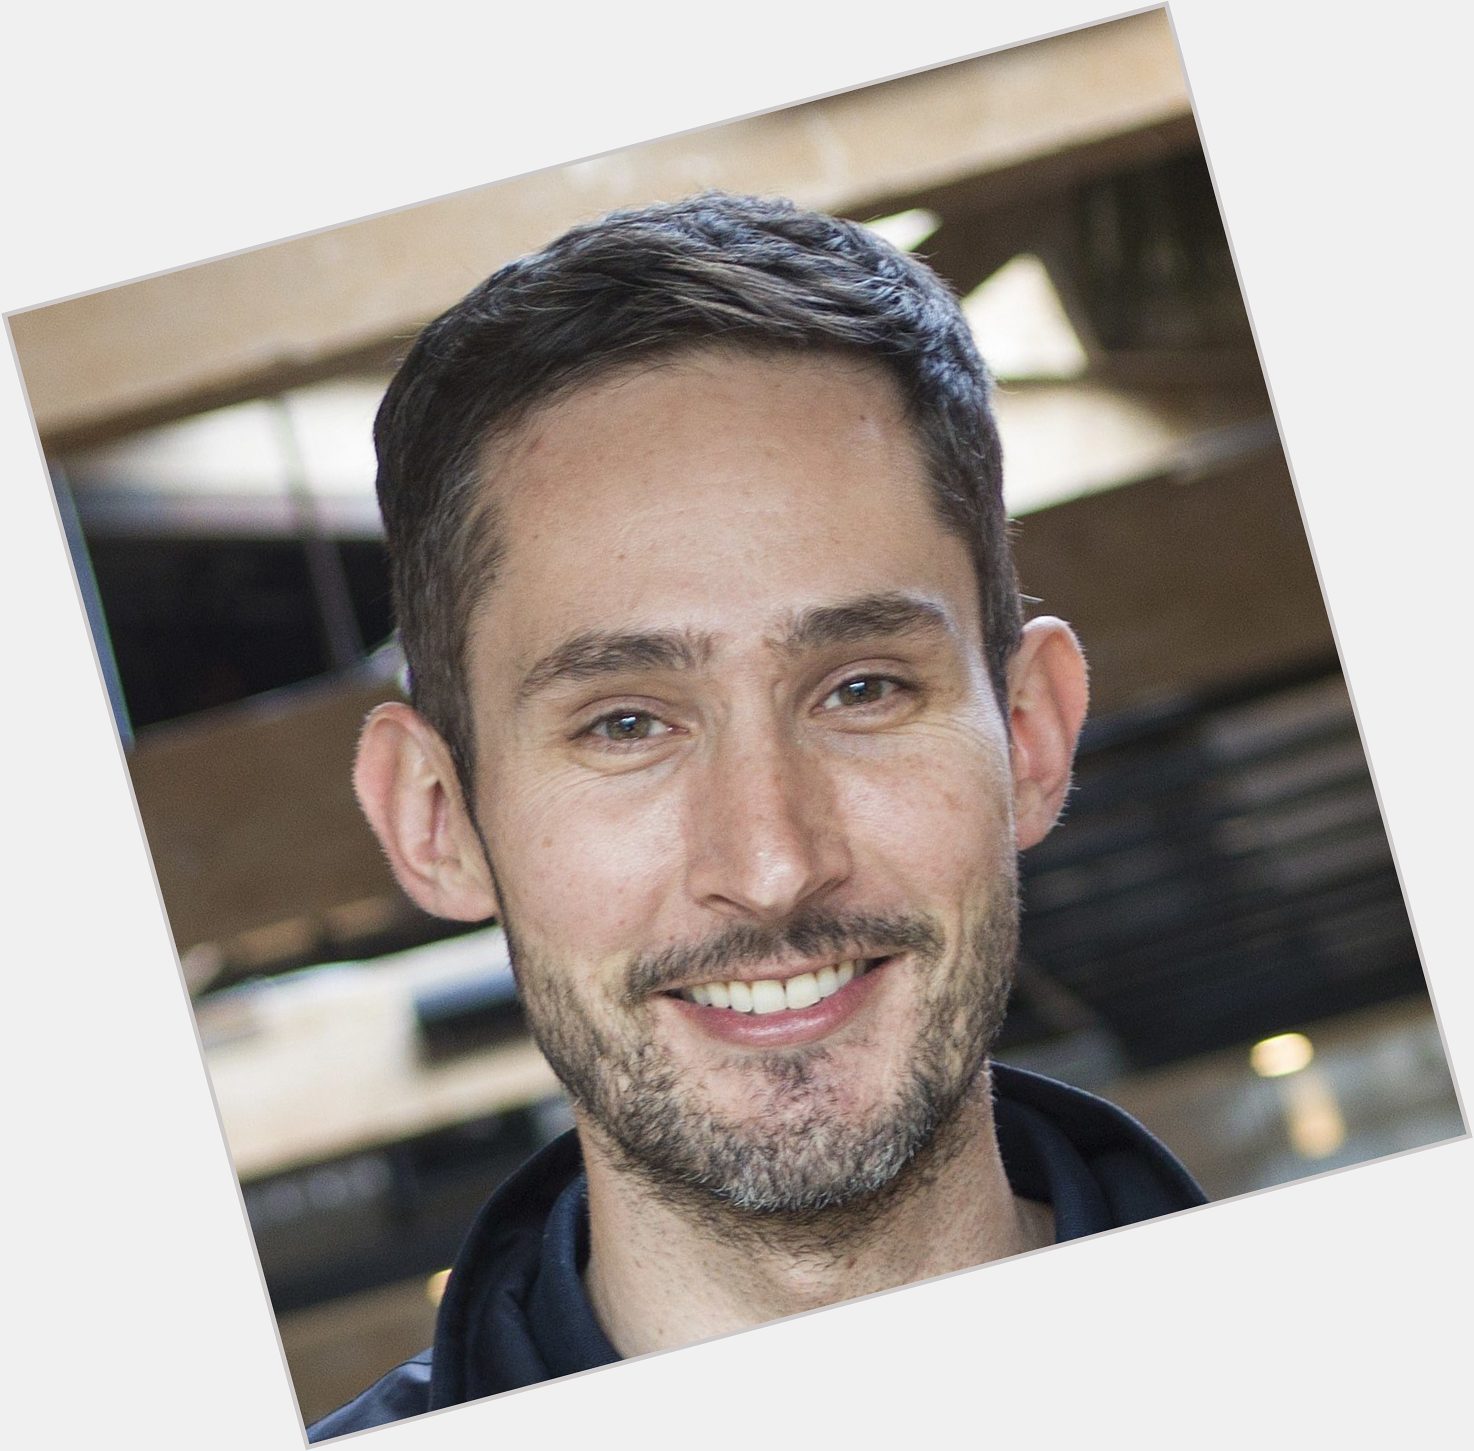 Https://fanpagepress.net/m/K/Kevin Systrom New Pic 1